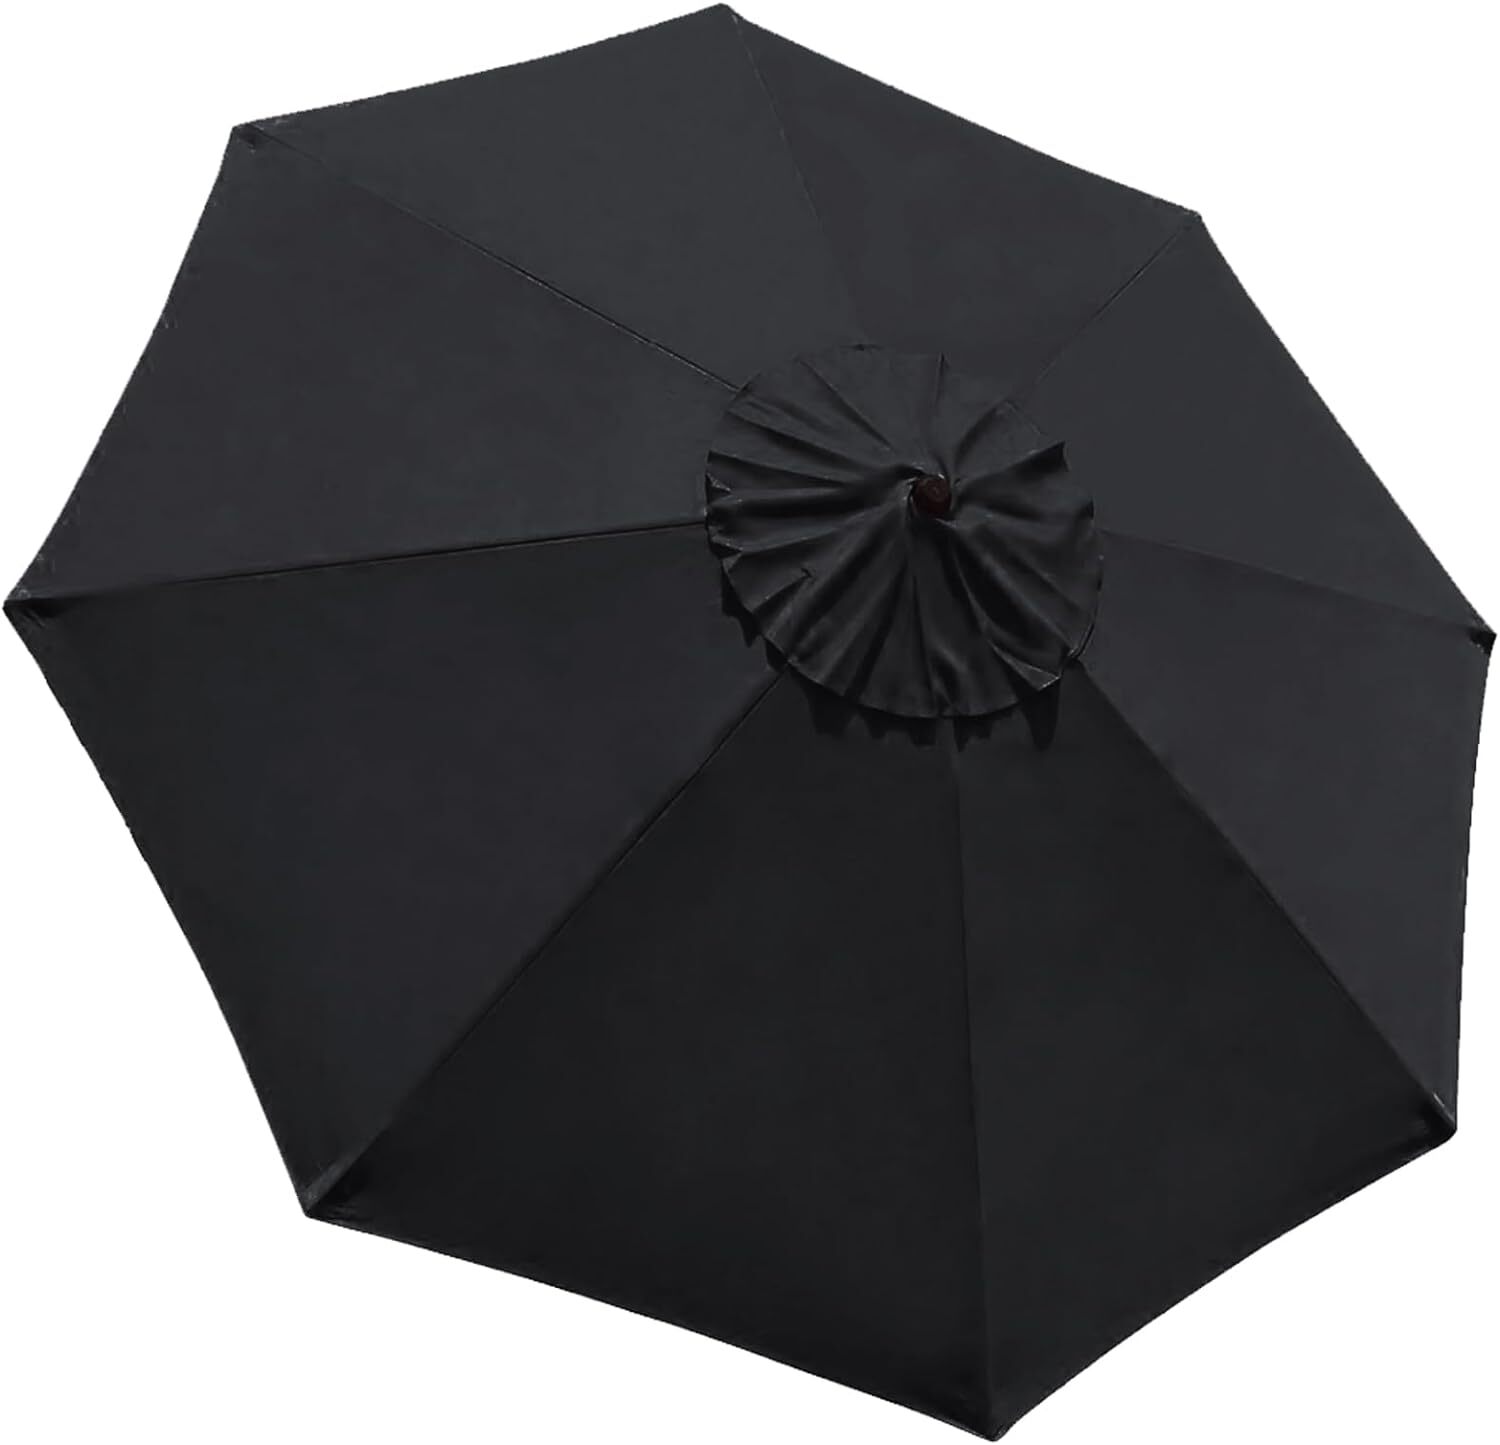 3m Patio Umbrella Replacement Cover 10ft 8 Ribs Large Outdoor Canopy (Black)